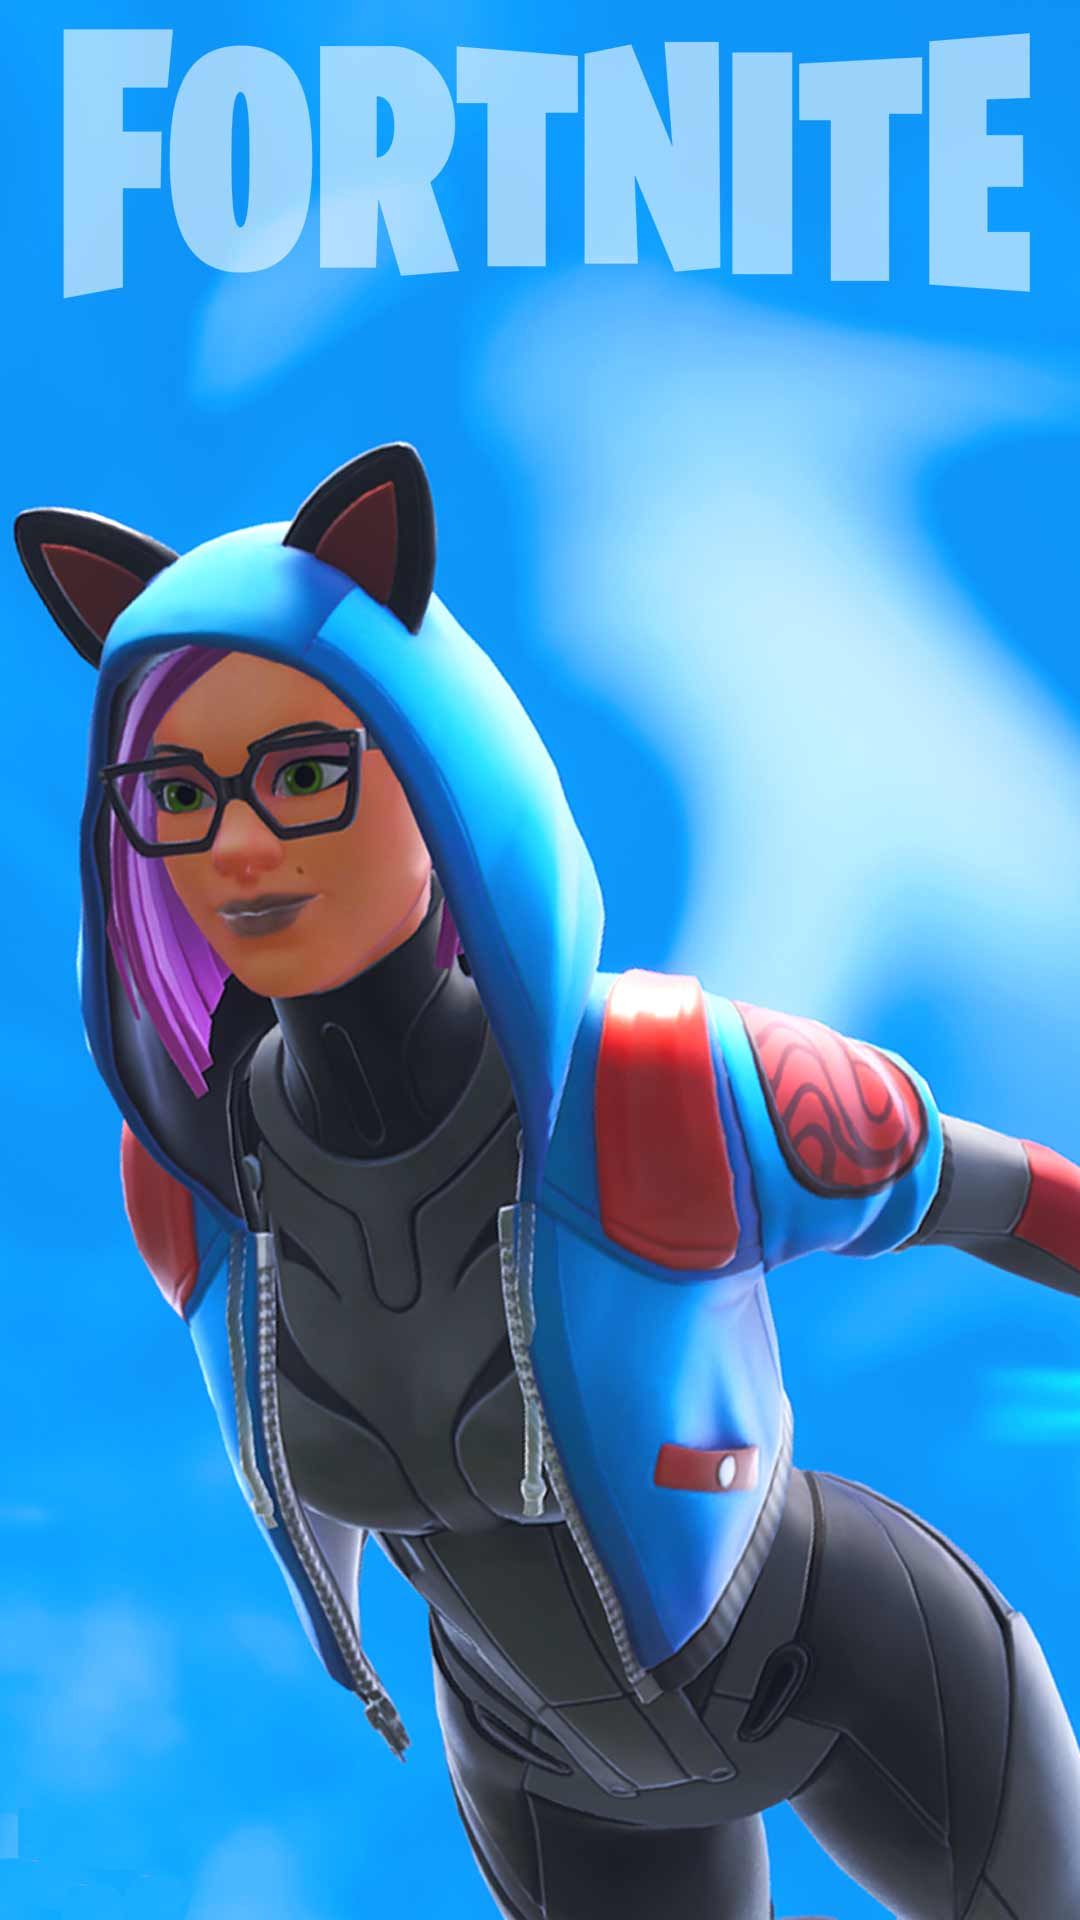 Lynx fortnite skin wallpaper HD phone background art Poster download for iPhone android home screen. Cat drawing, Ragdoll cat, Lynx